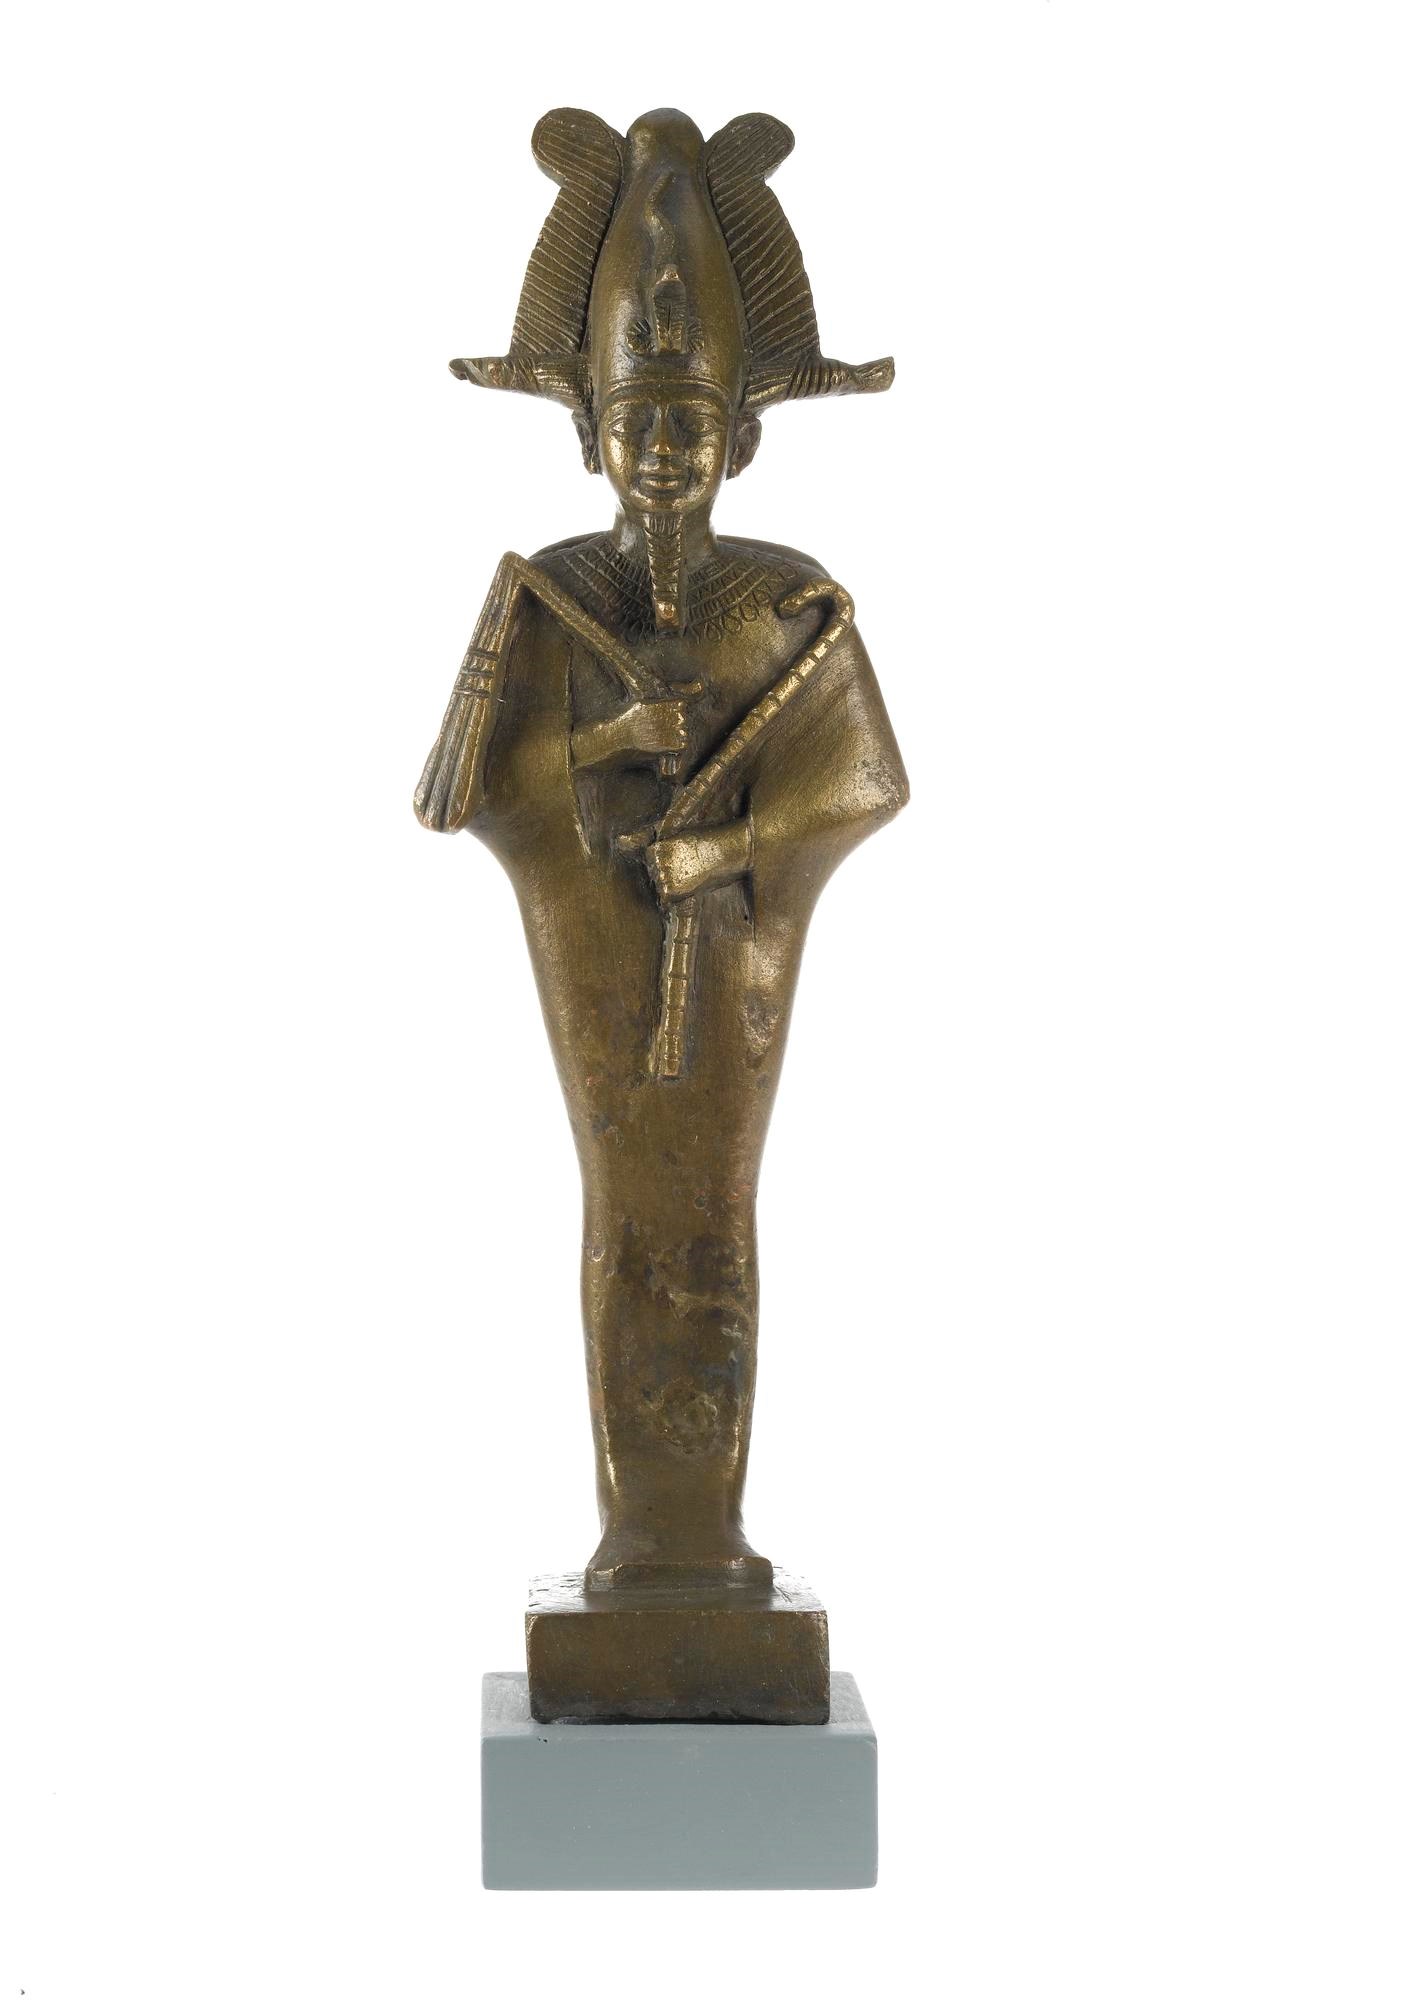 Statuette in bronze of Osiris, standing mummiform with Atef-crown and sceptres, and with seperate wooden base: Ancient Egyptian, from Saqqara, Lower Egypt, Late Dynastic Period, 664-332 BC.